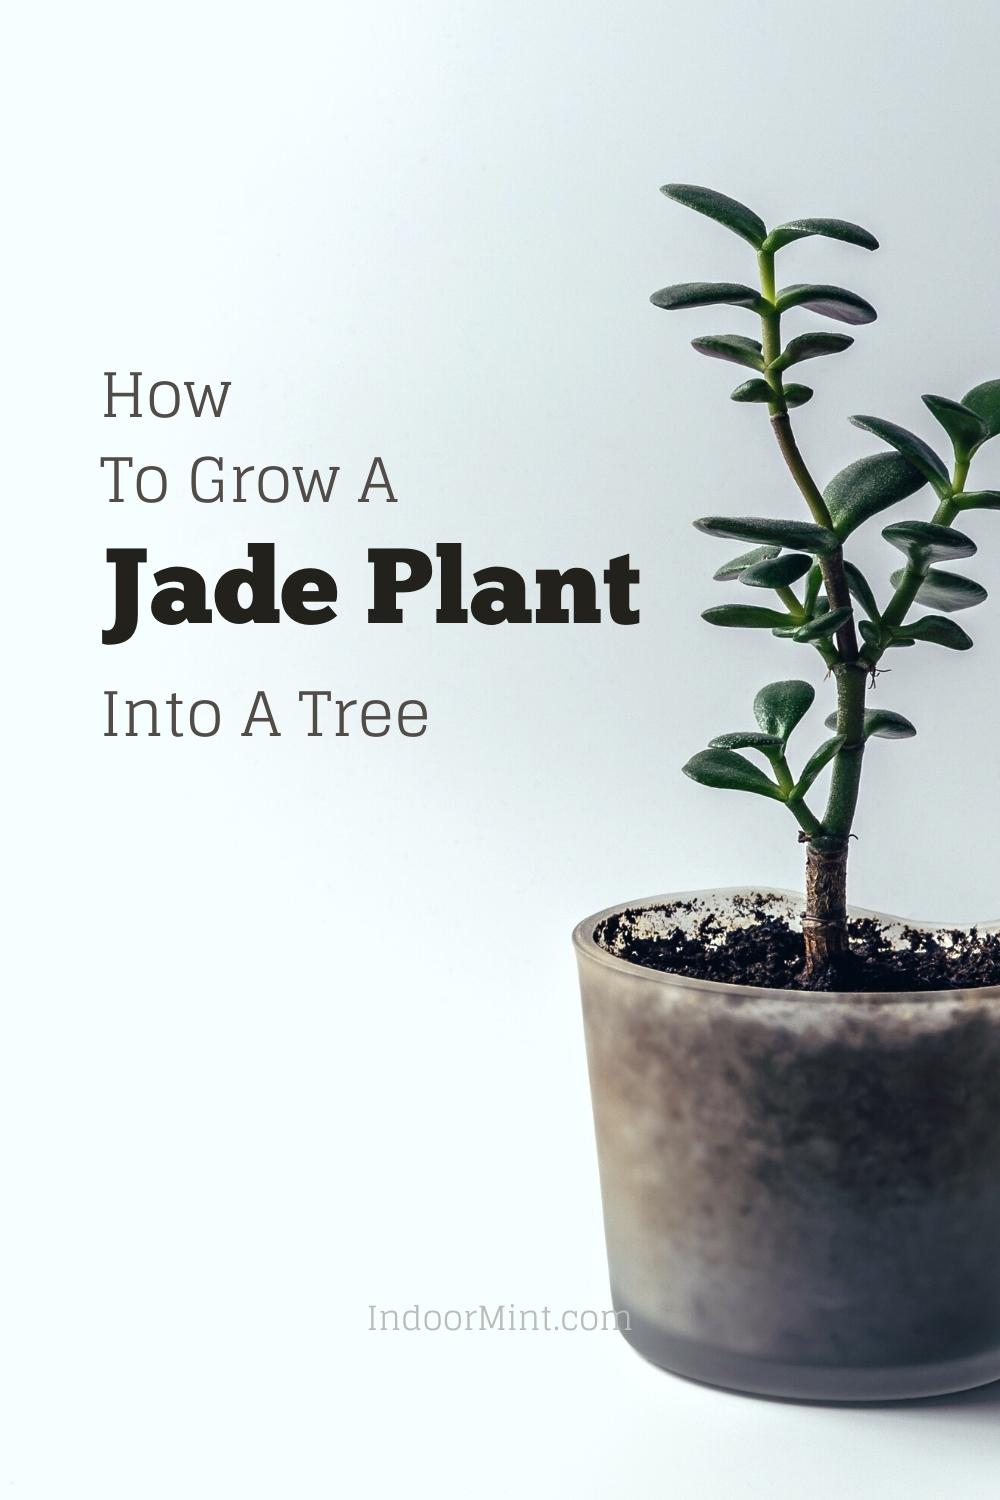 grow a jade plant into a tree guide cover image